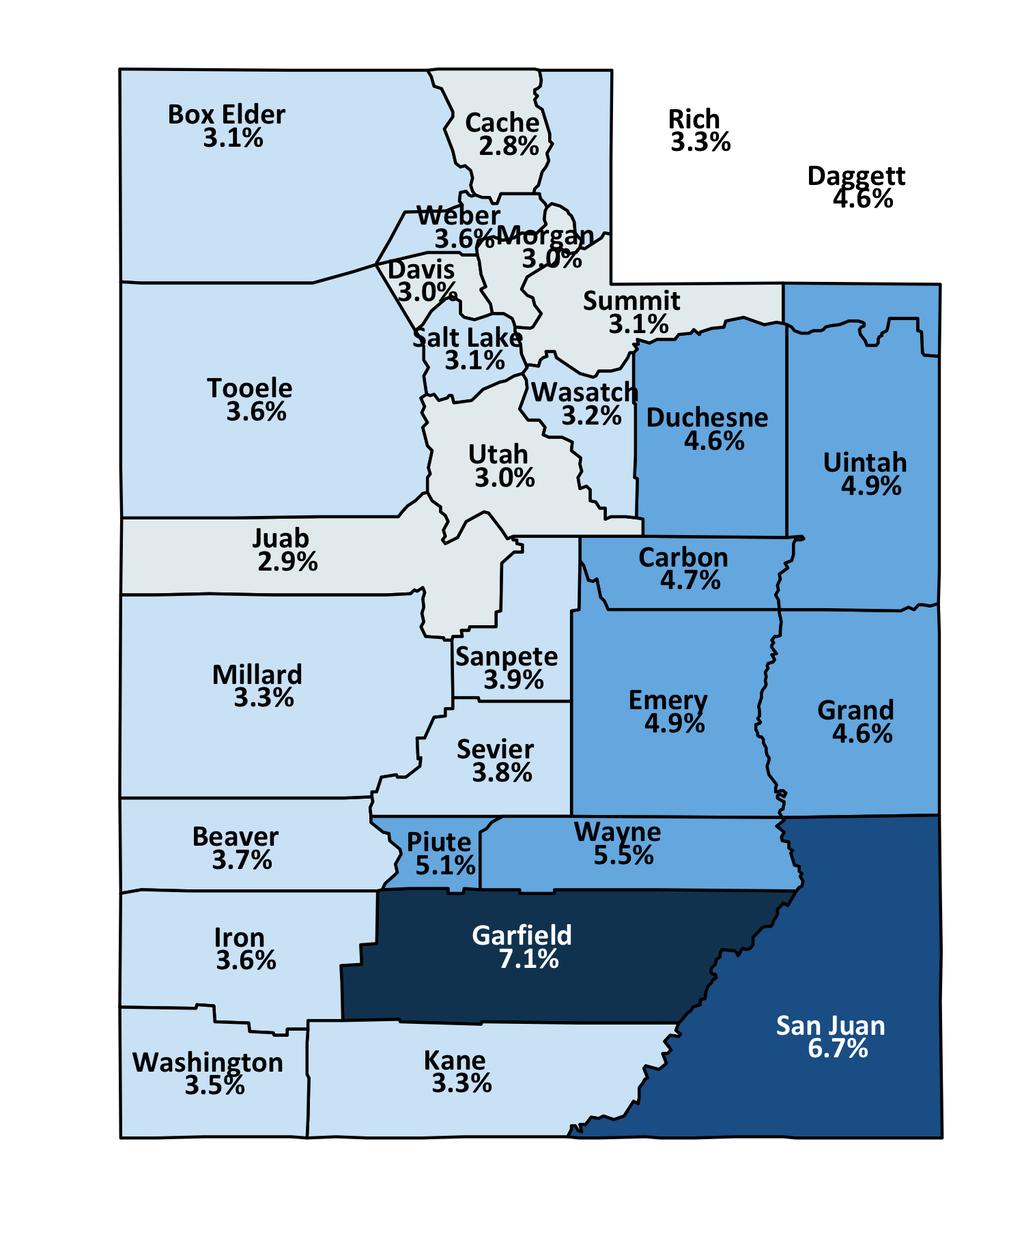 Utah Unemployment Rates By County September 2018 State Rate = 3.2% 7.0% + 6.0% to 6.